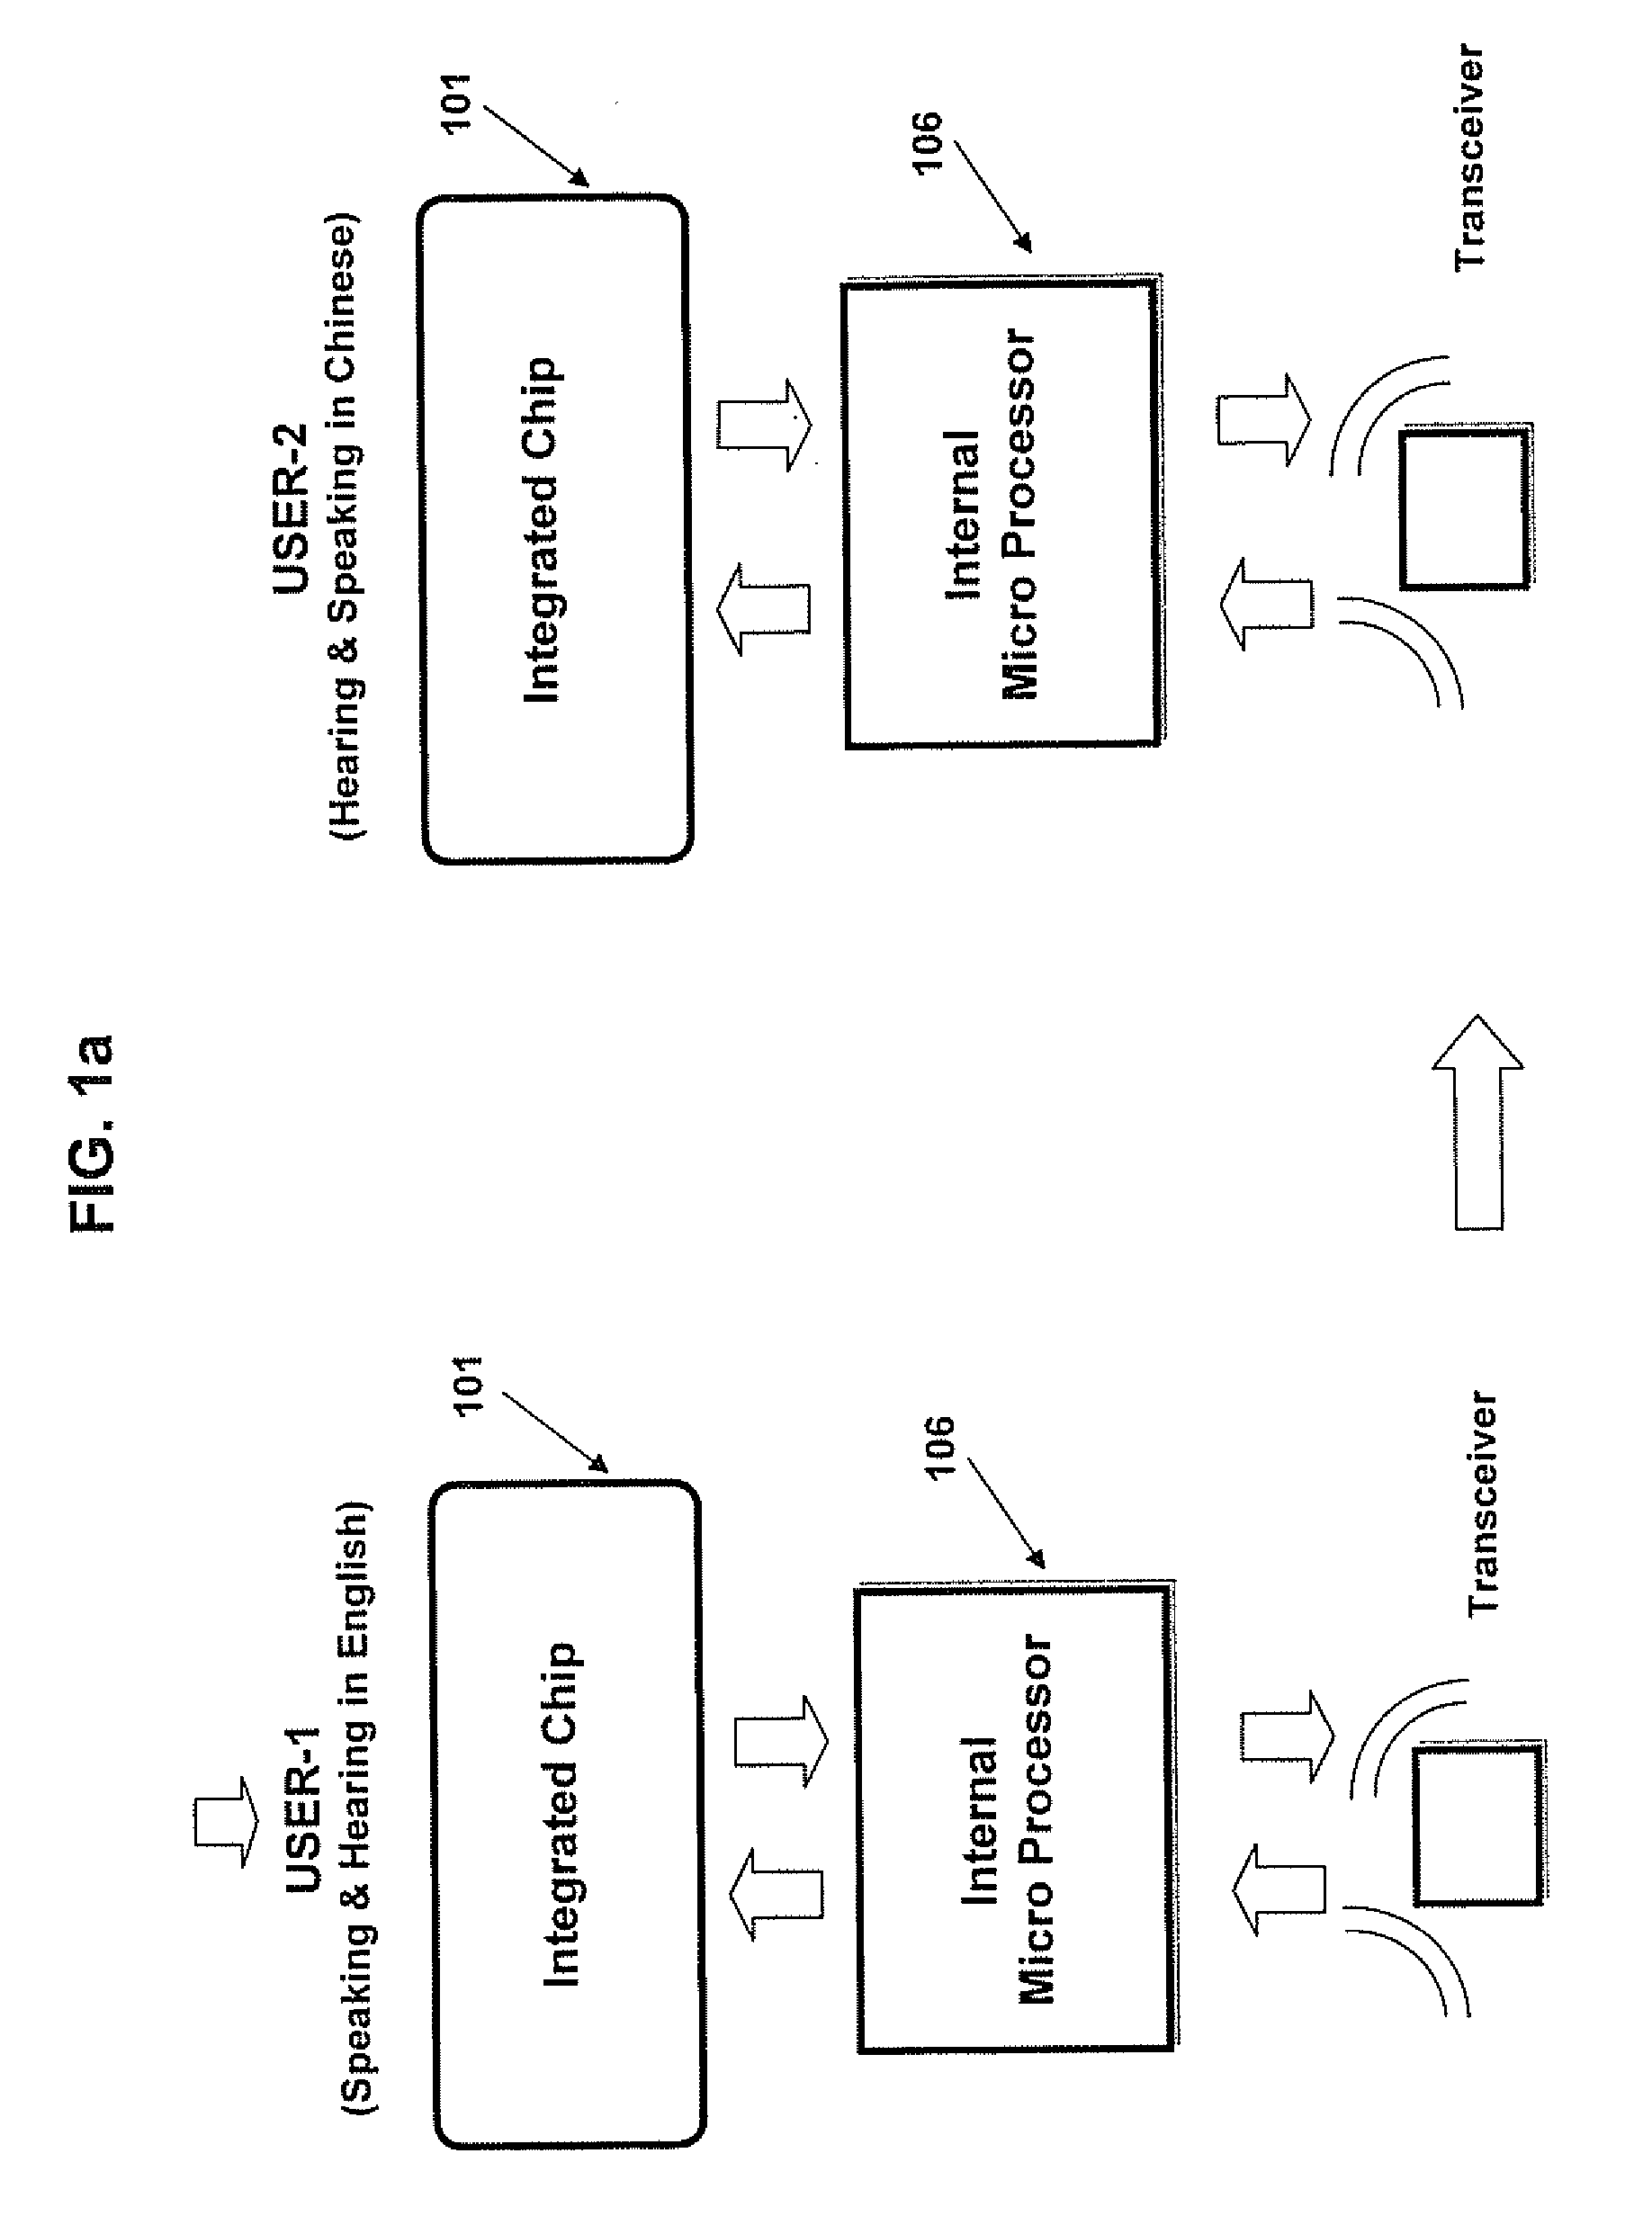 Method for realtime spoken natural language translation and apparatus therefor